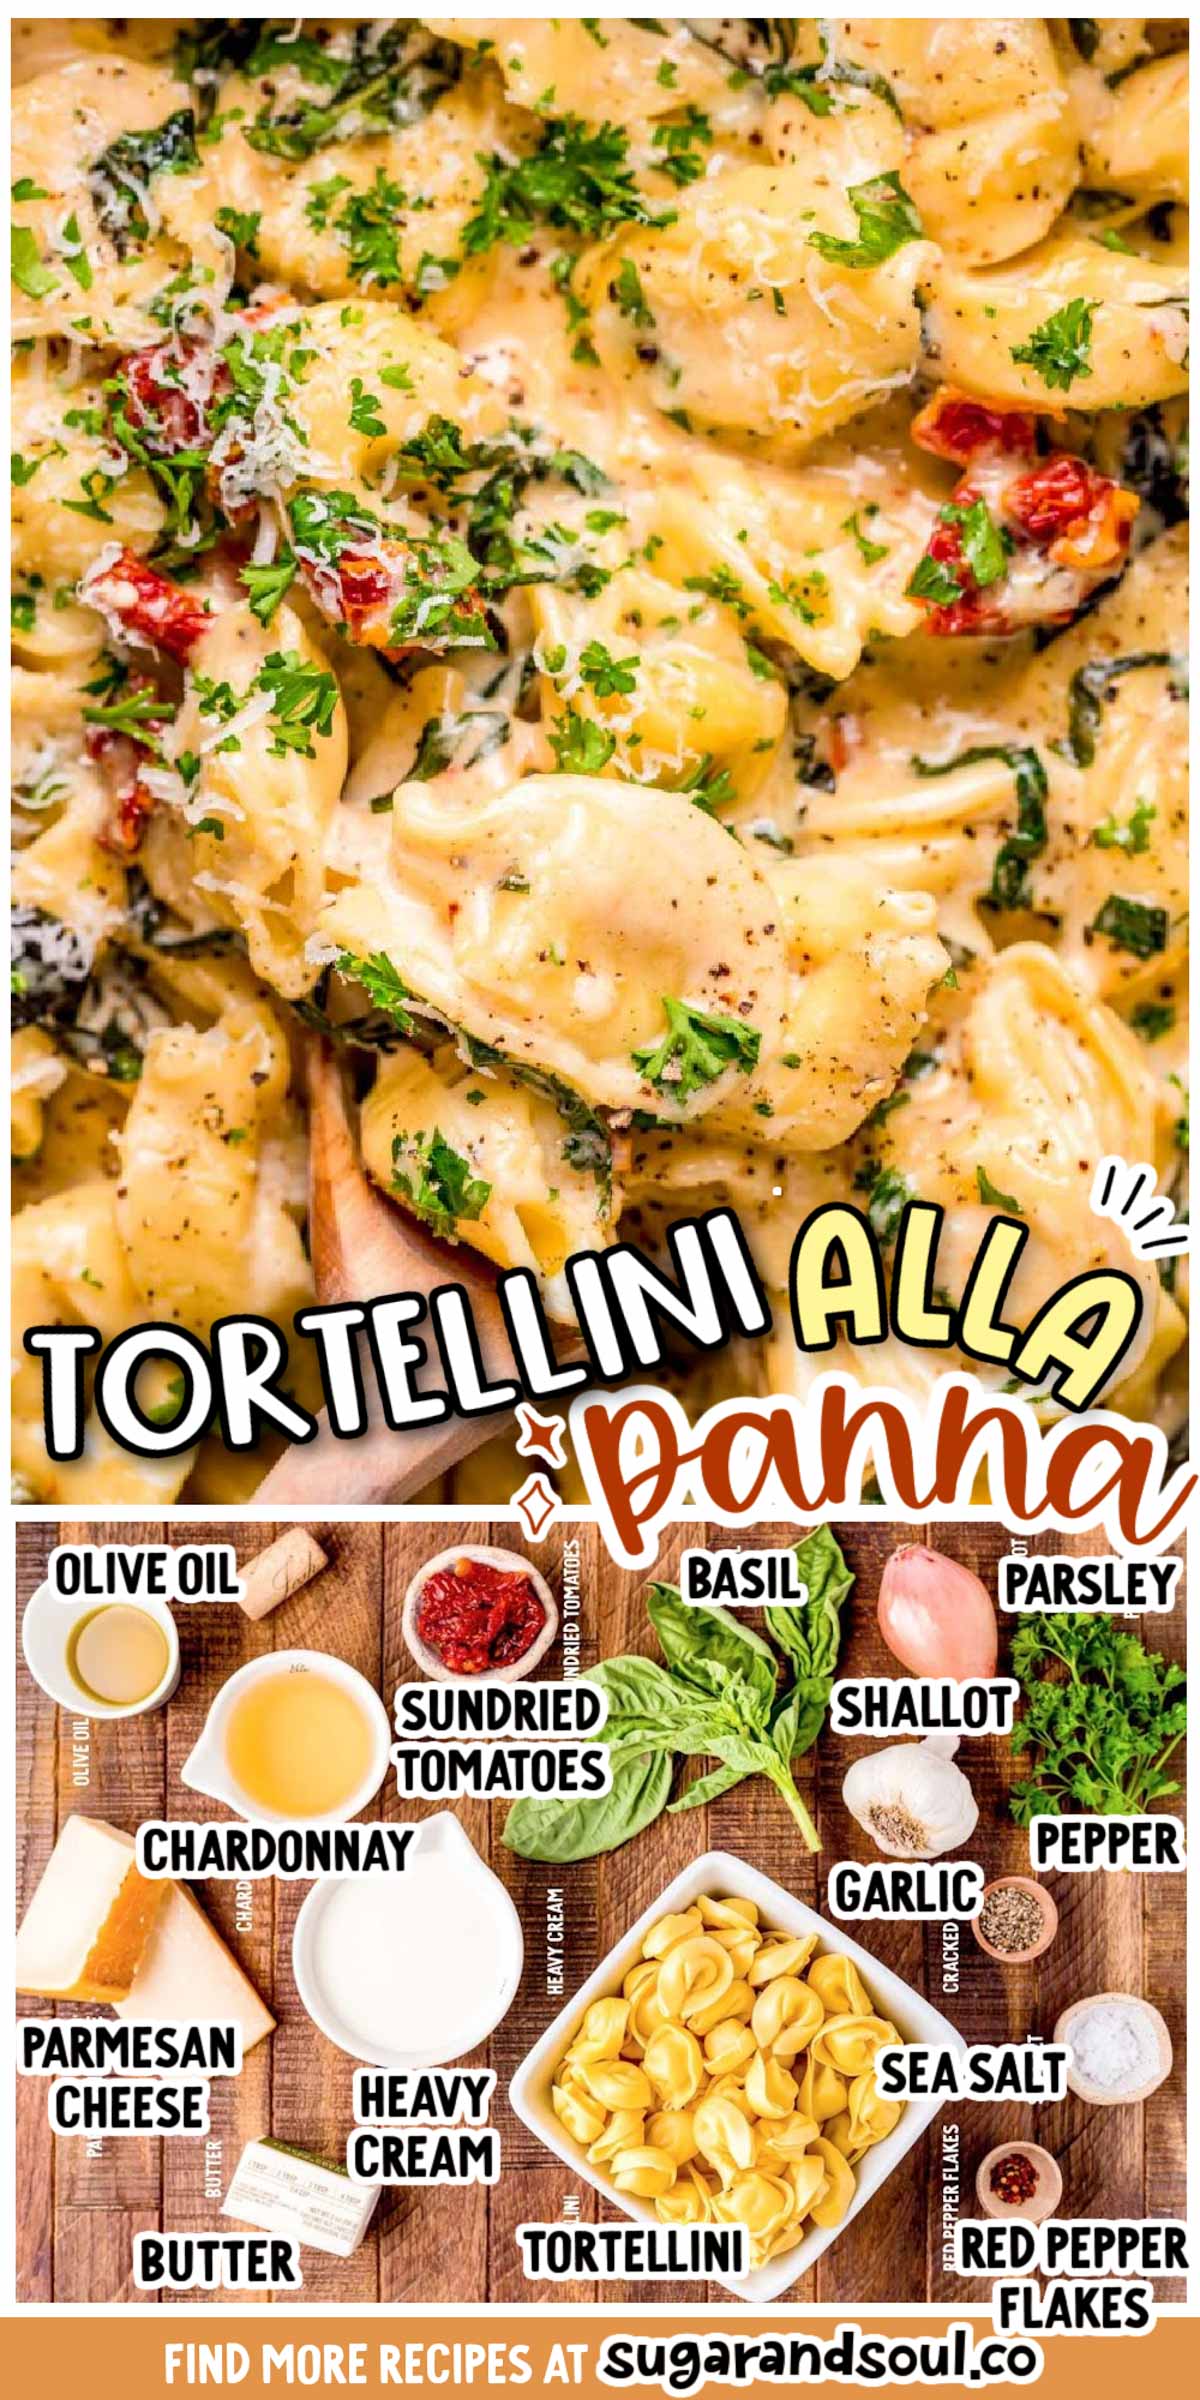 Tortellini Alla Panna is a simple, mouthwatering Italian pasta dish that covers store-bought tortellini in a homemade creamy parmesan sauce! Take your first bite of this incredible dinner recipe in just 40 minutes! via @sugarandsoulco